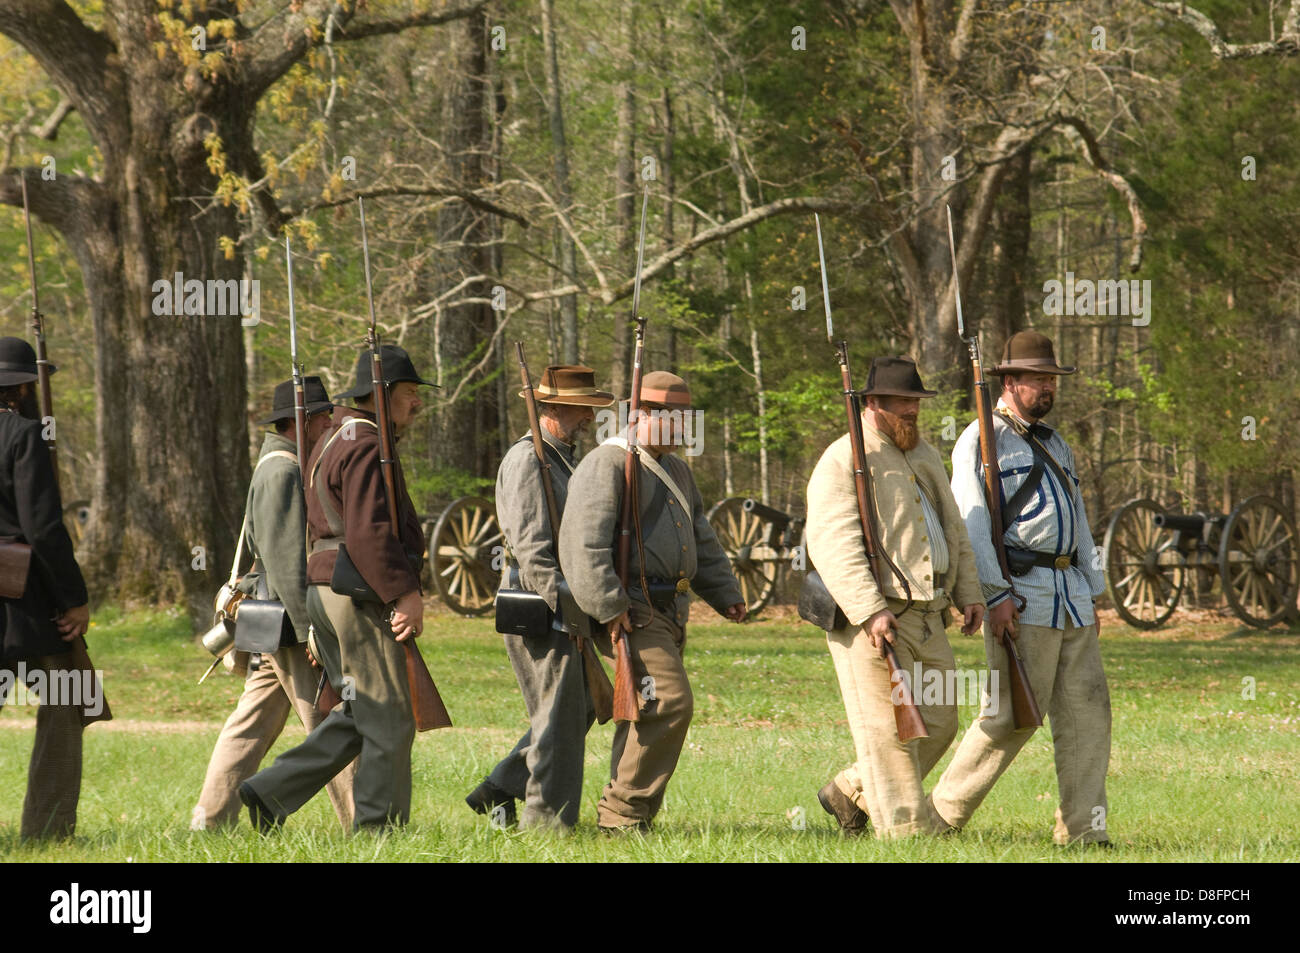 Confederate reenactors marching, Shiloh National Military Park, Tennessee. Digital photograph Stock Photo